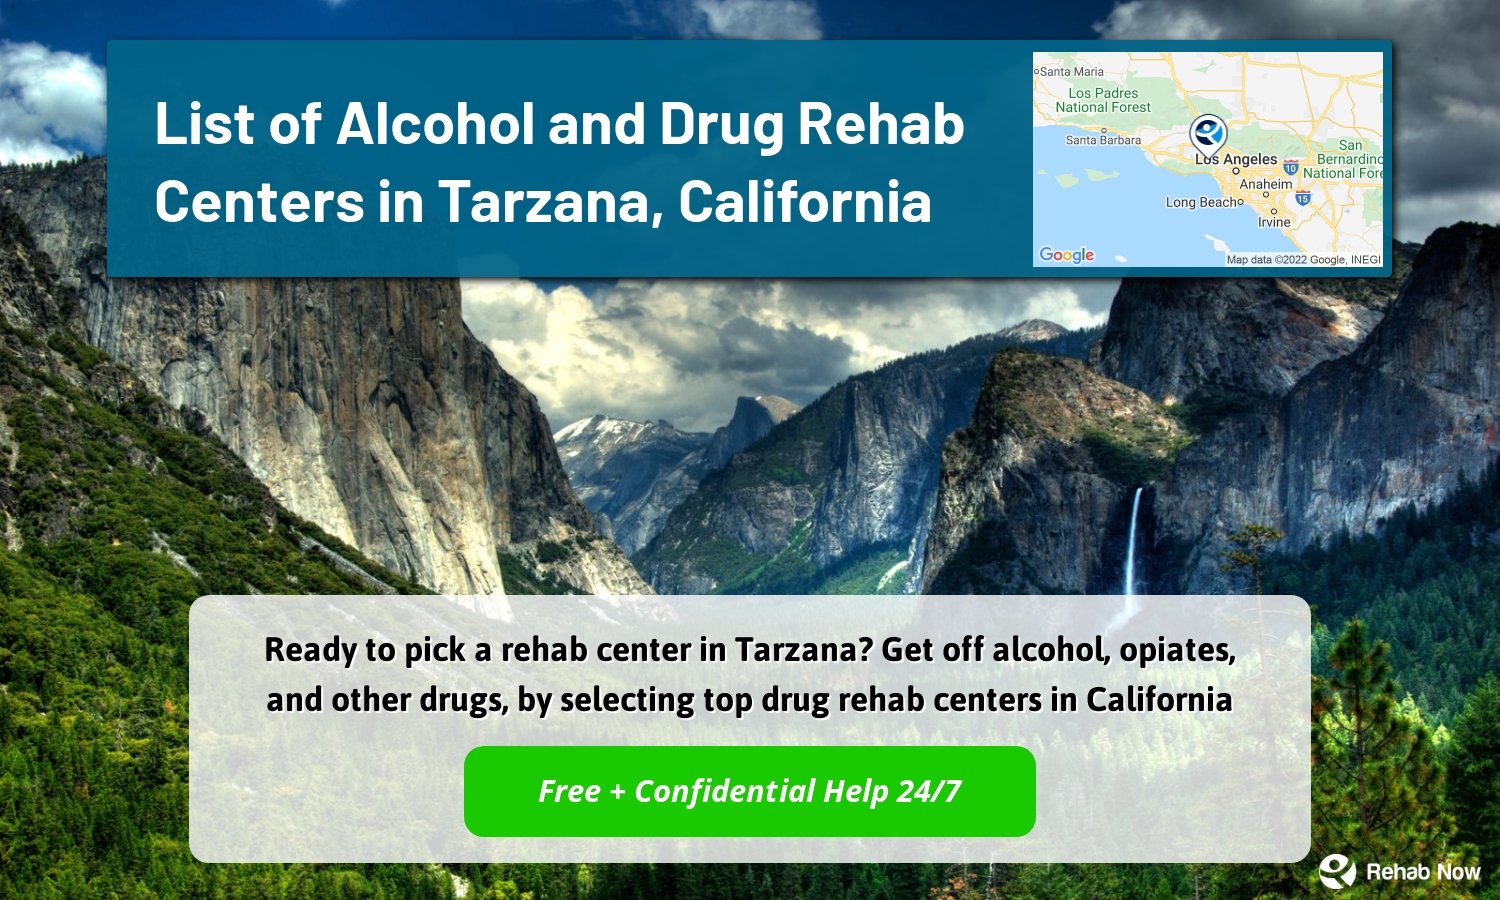 Ready to pick a rehab center in Tarzana? Get off alcohol, opiates, and other drugs, by selecting top drug rehab centers in California